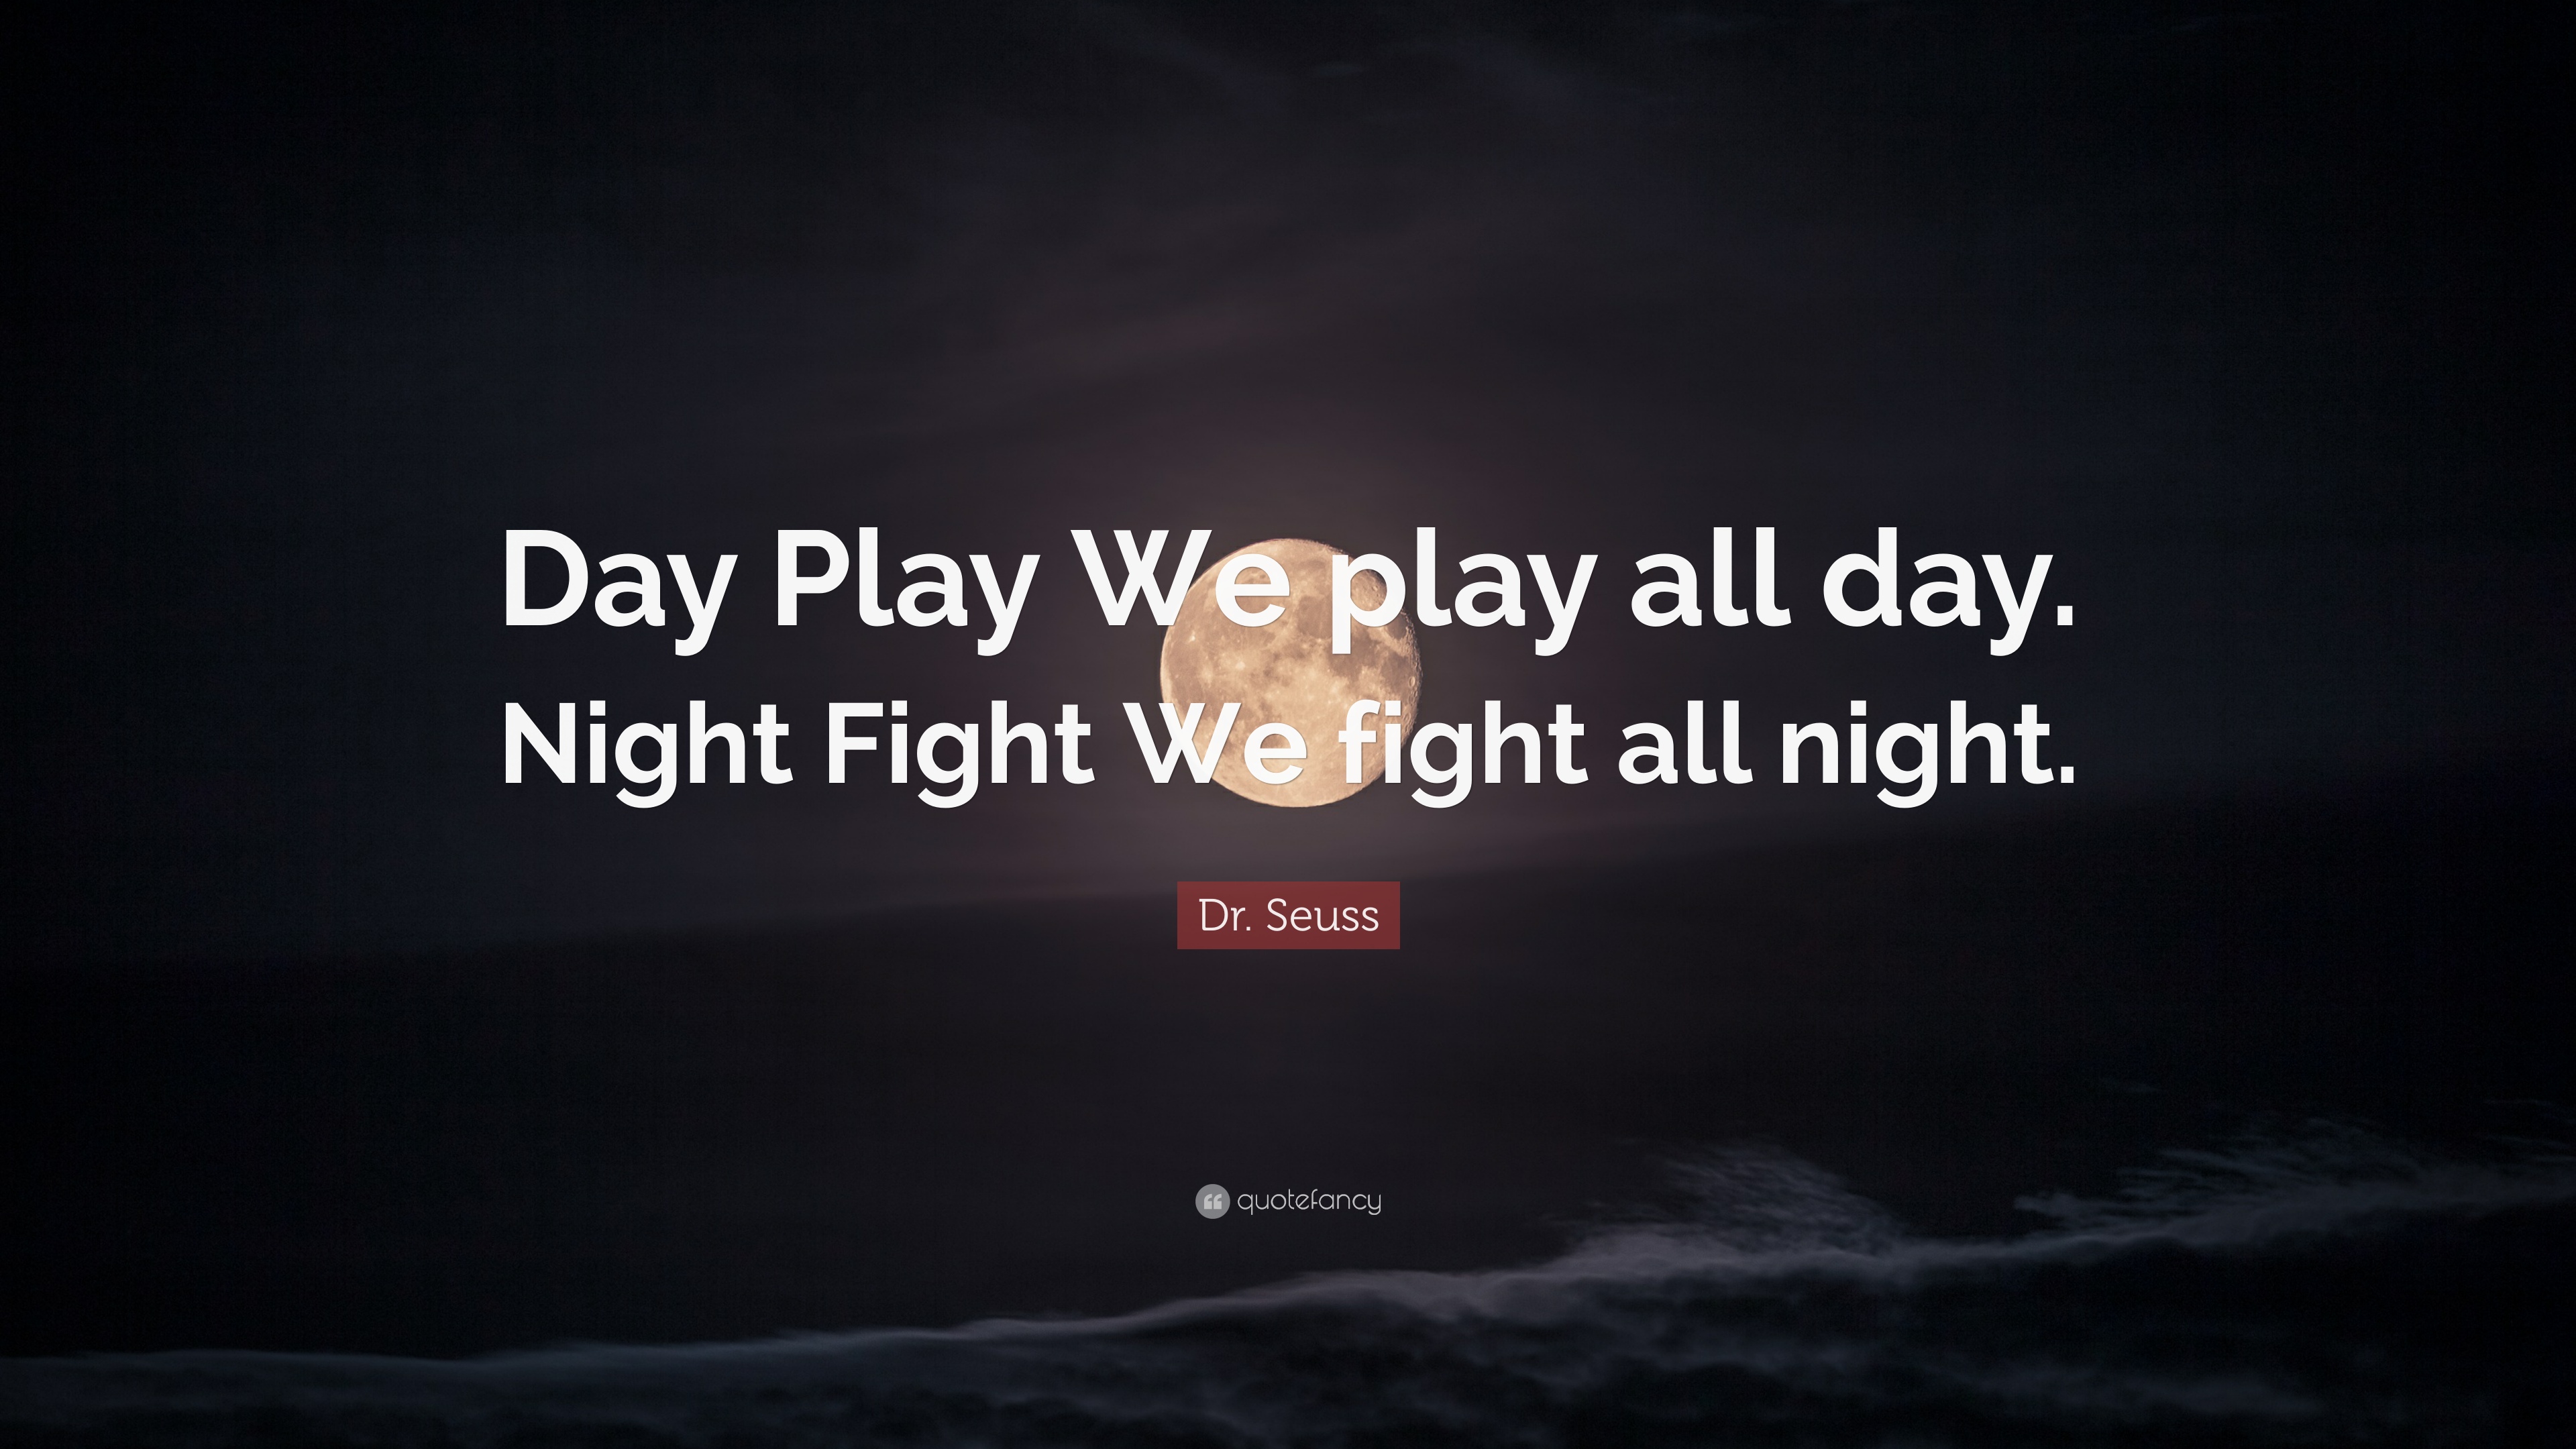 Dr. Seuss Quote: “Day Play We play all day. Night Fight We fight all